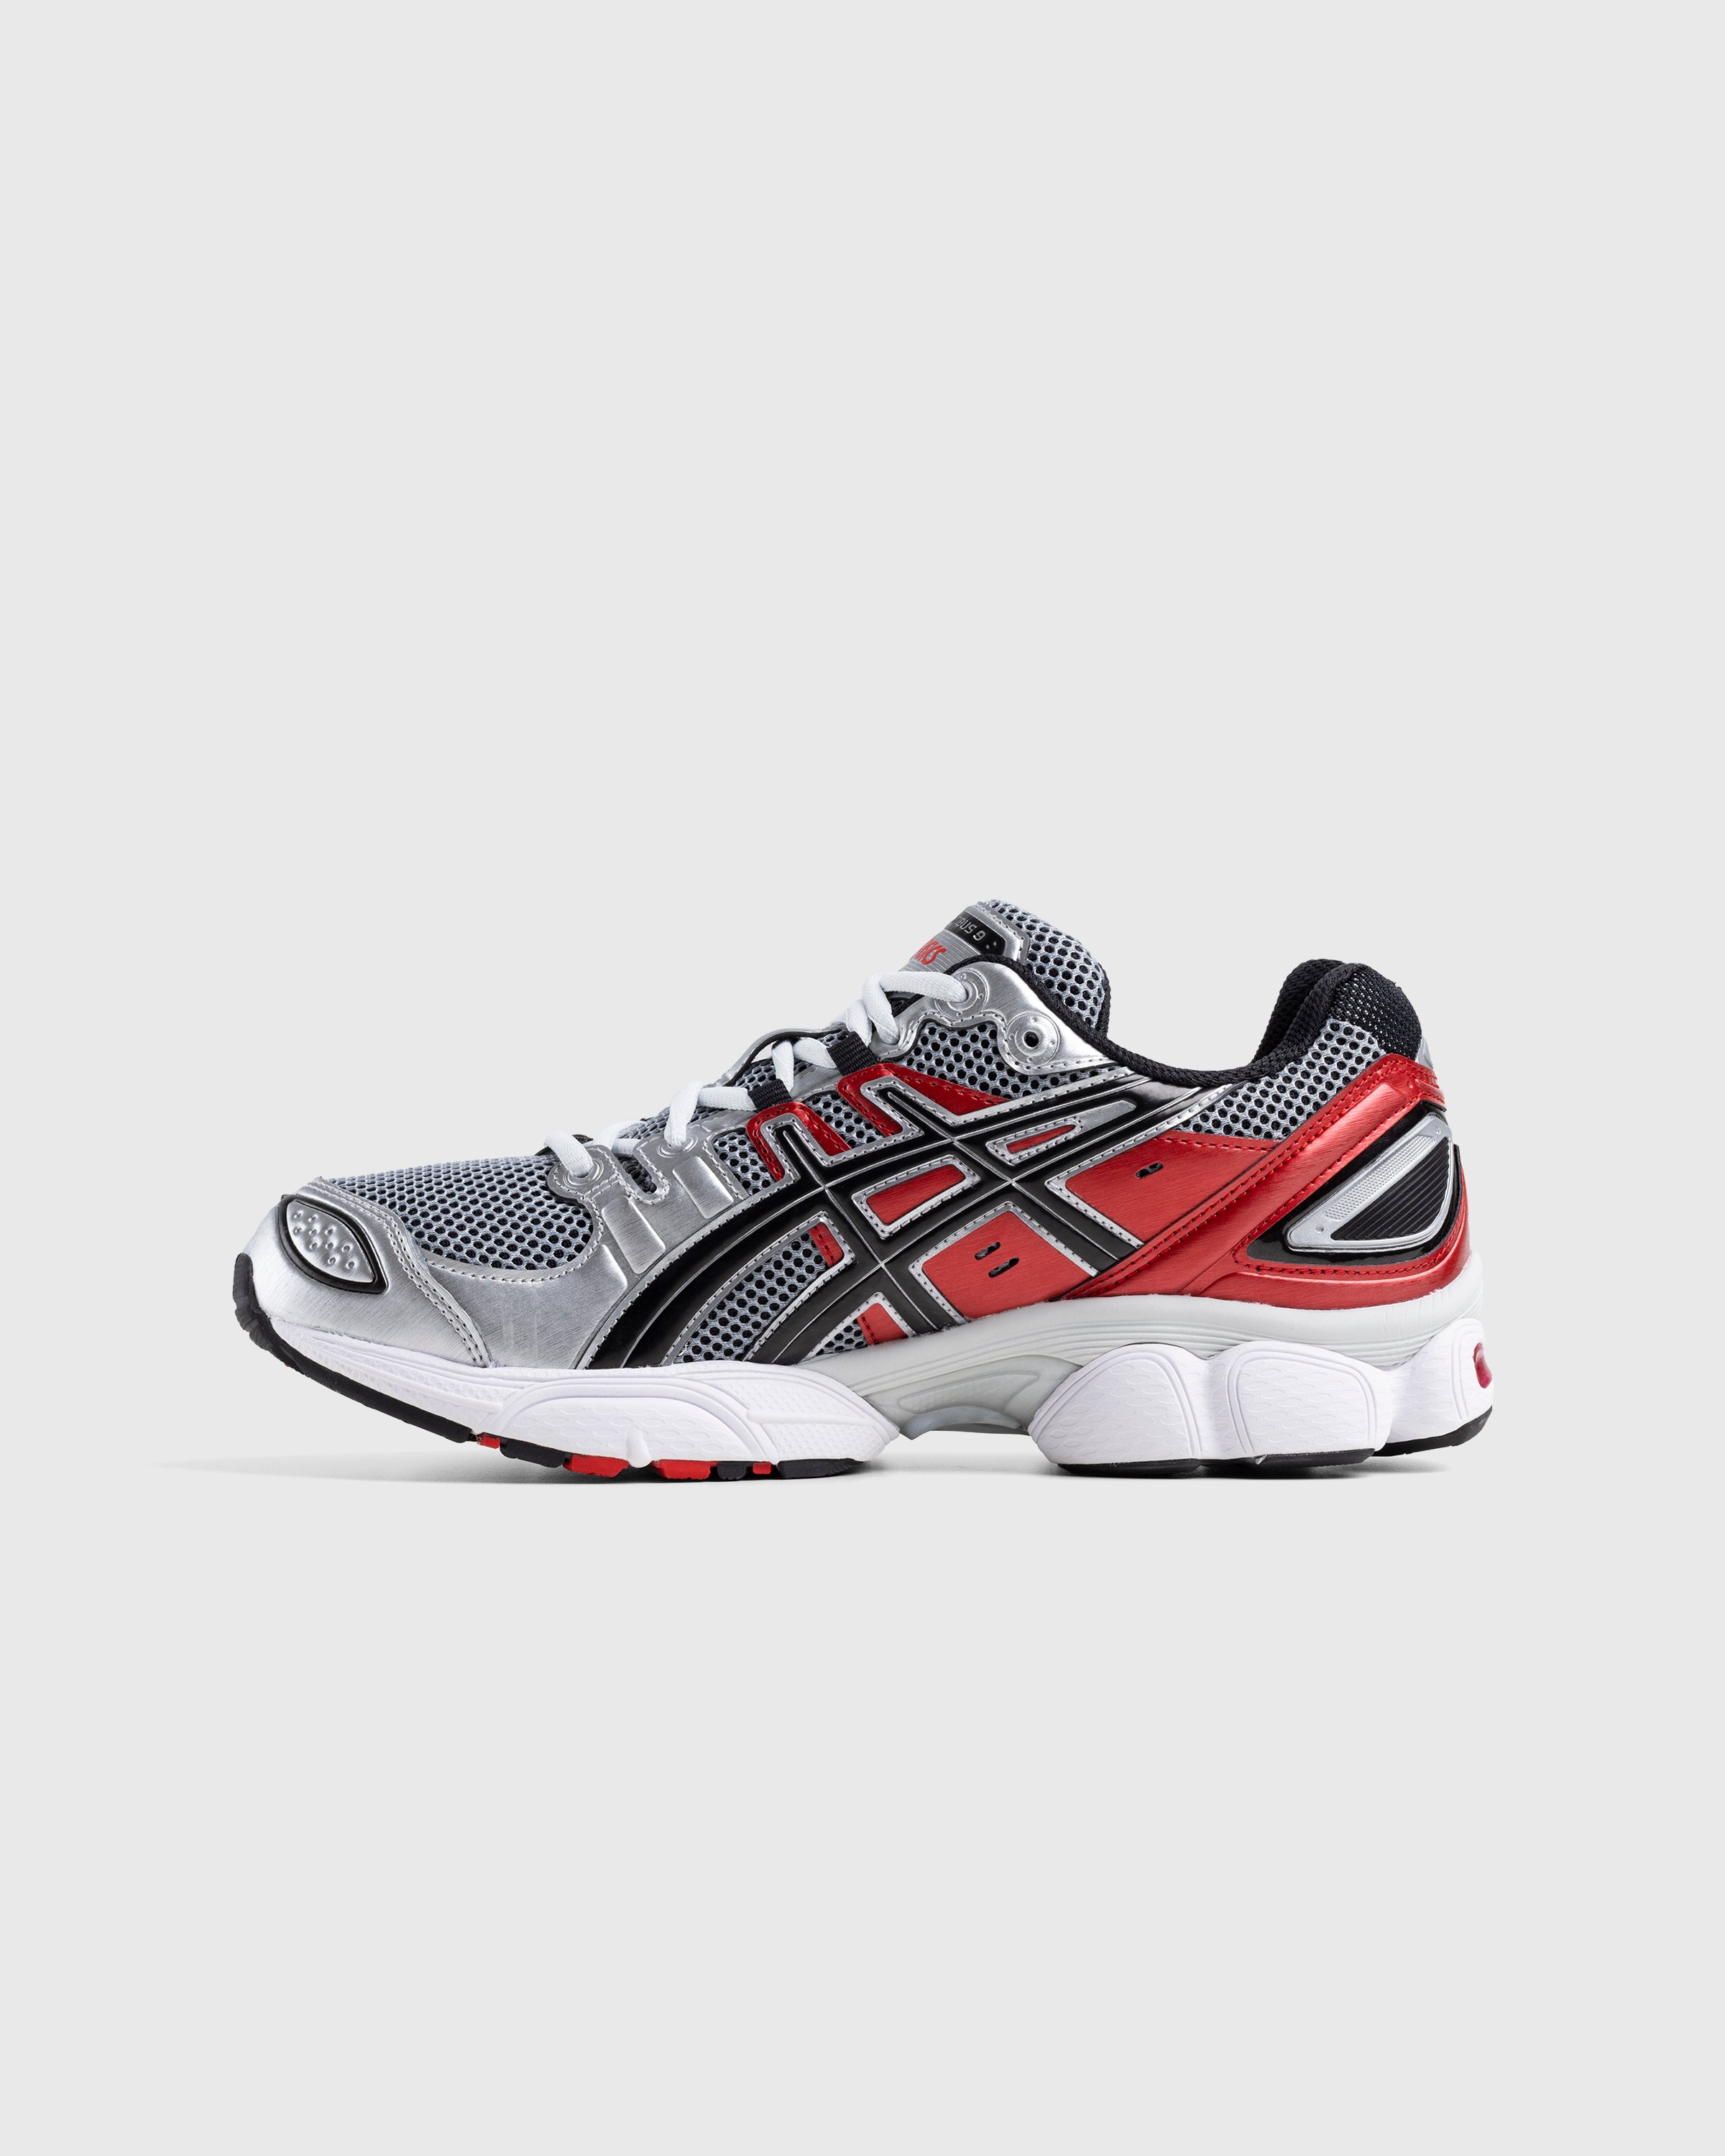 asics - Gel-Nimbus 9 Pure Silver/Classic Red - Footwear - Red - Image 2